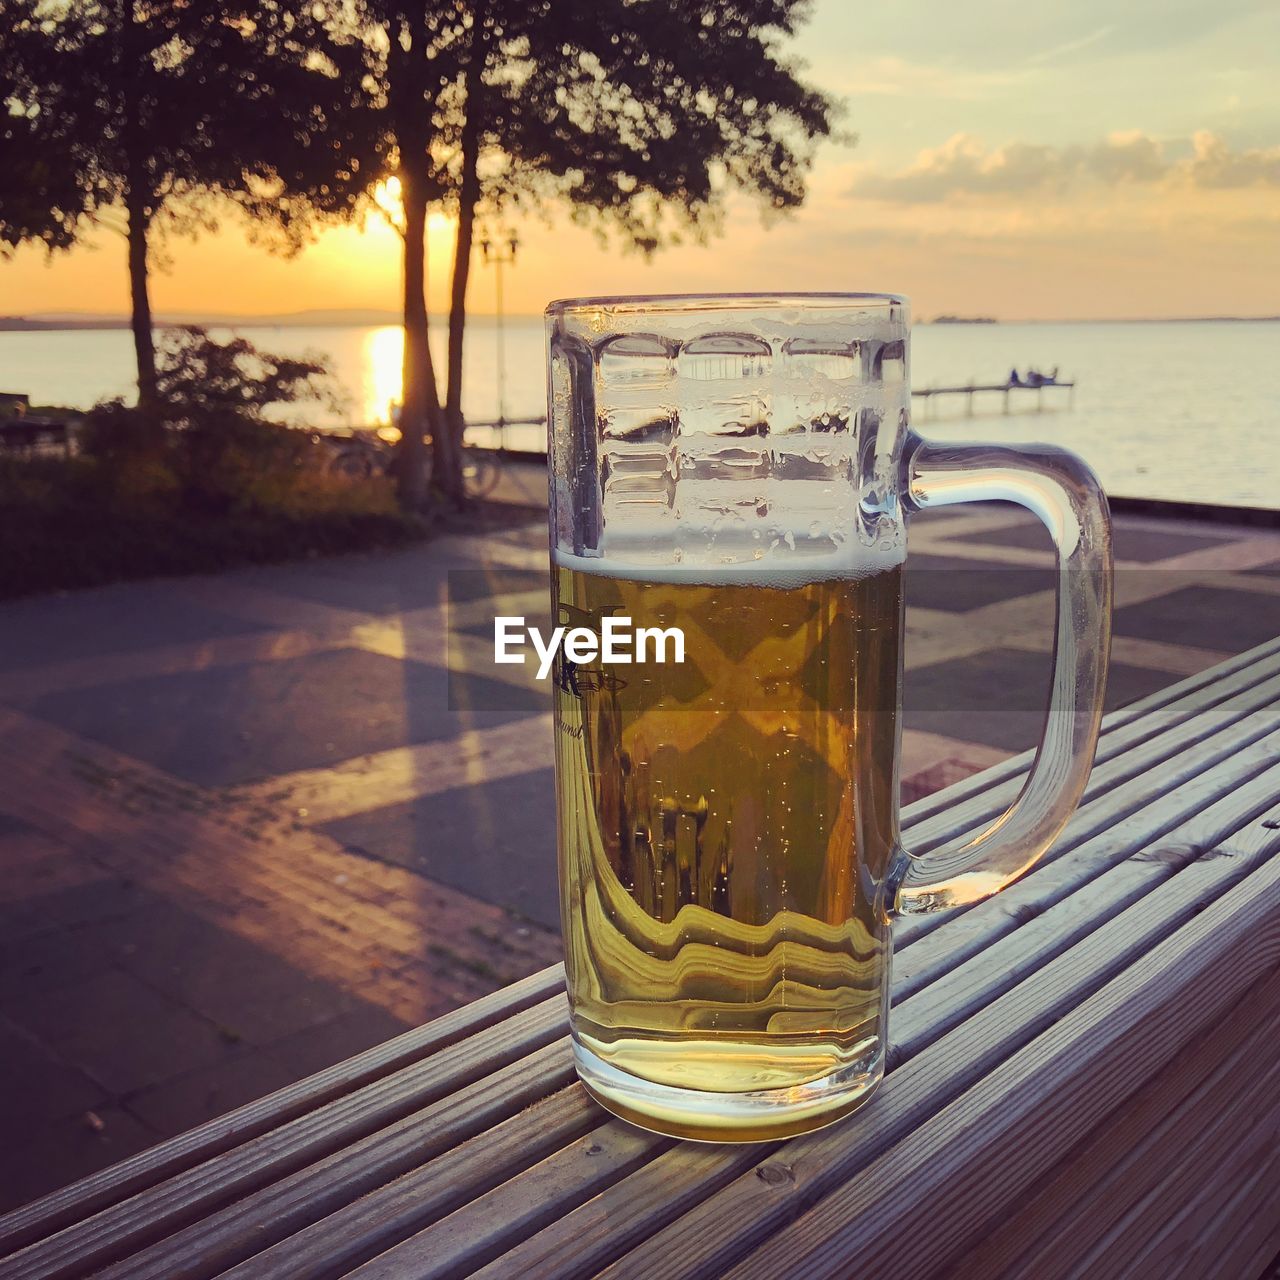 Beer glass on table against sea during sunset